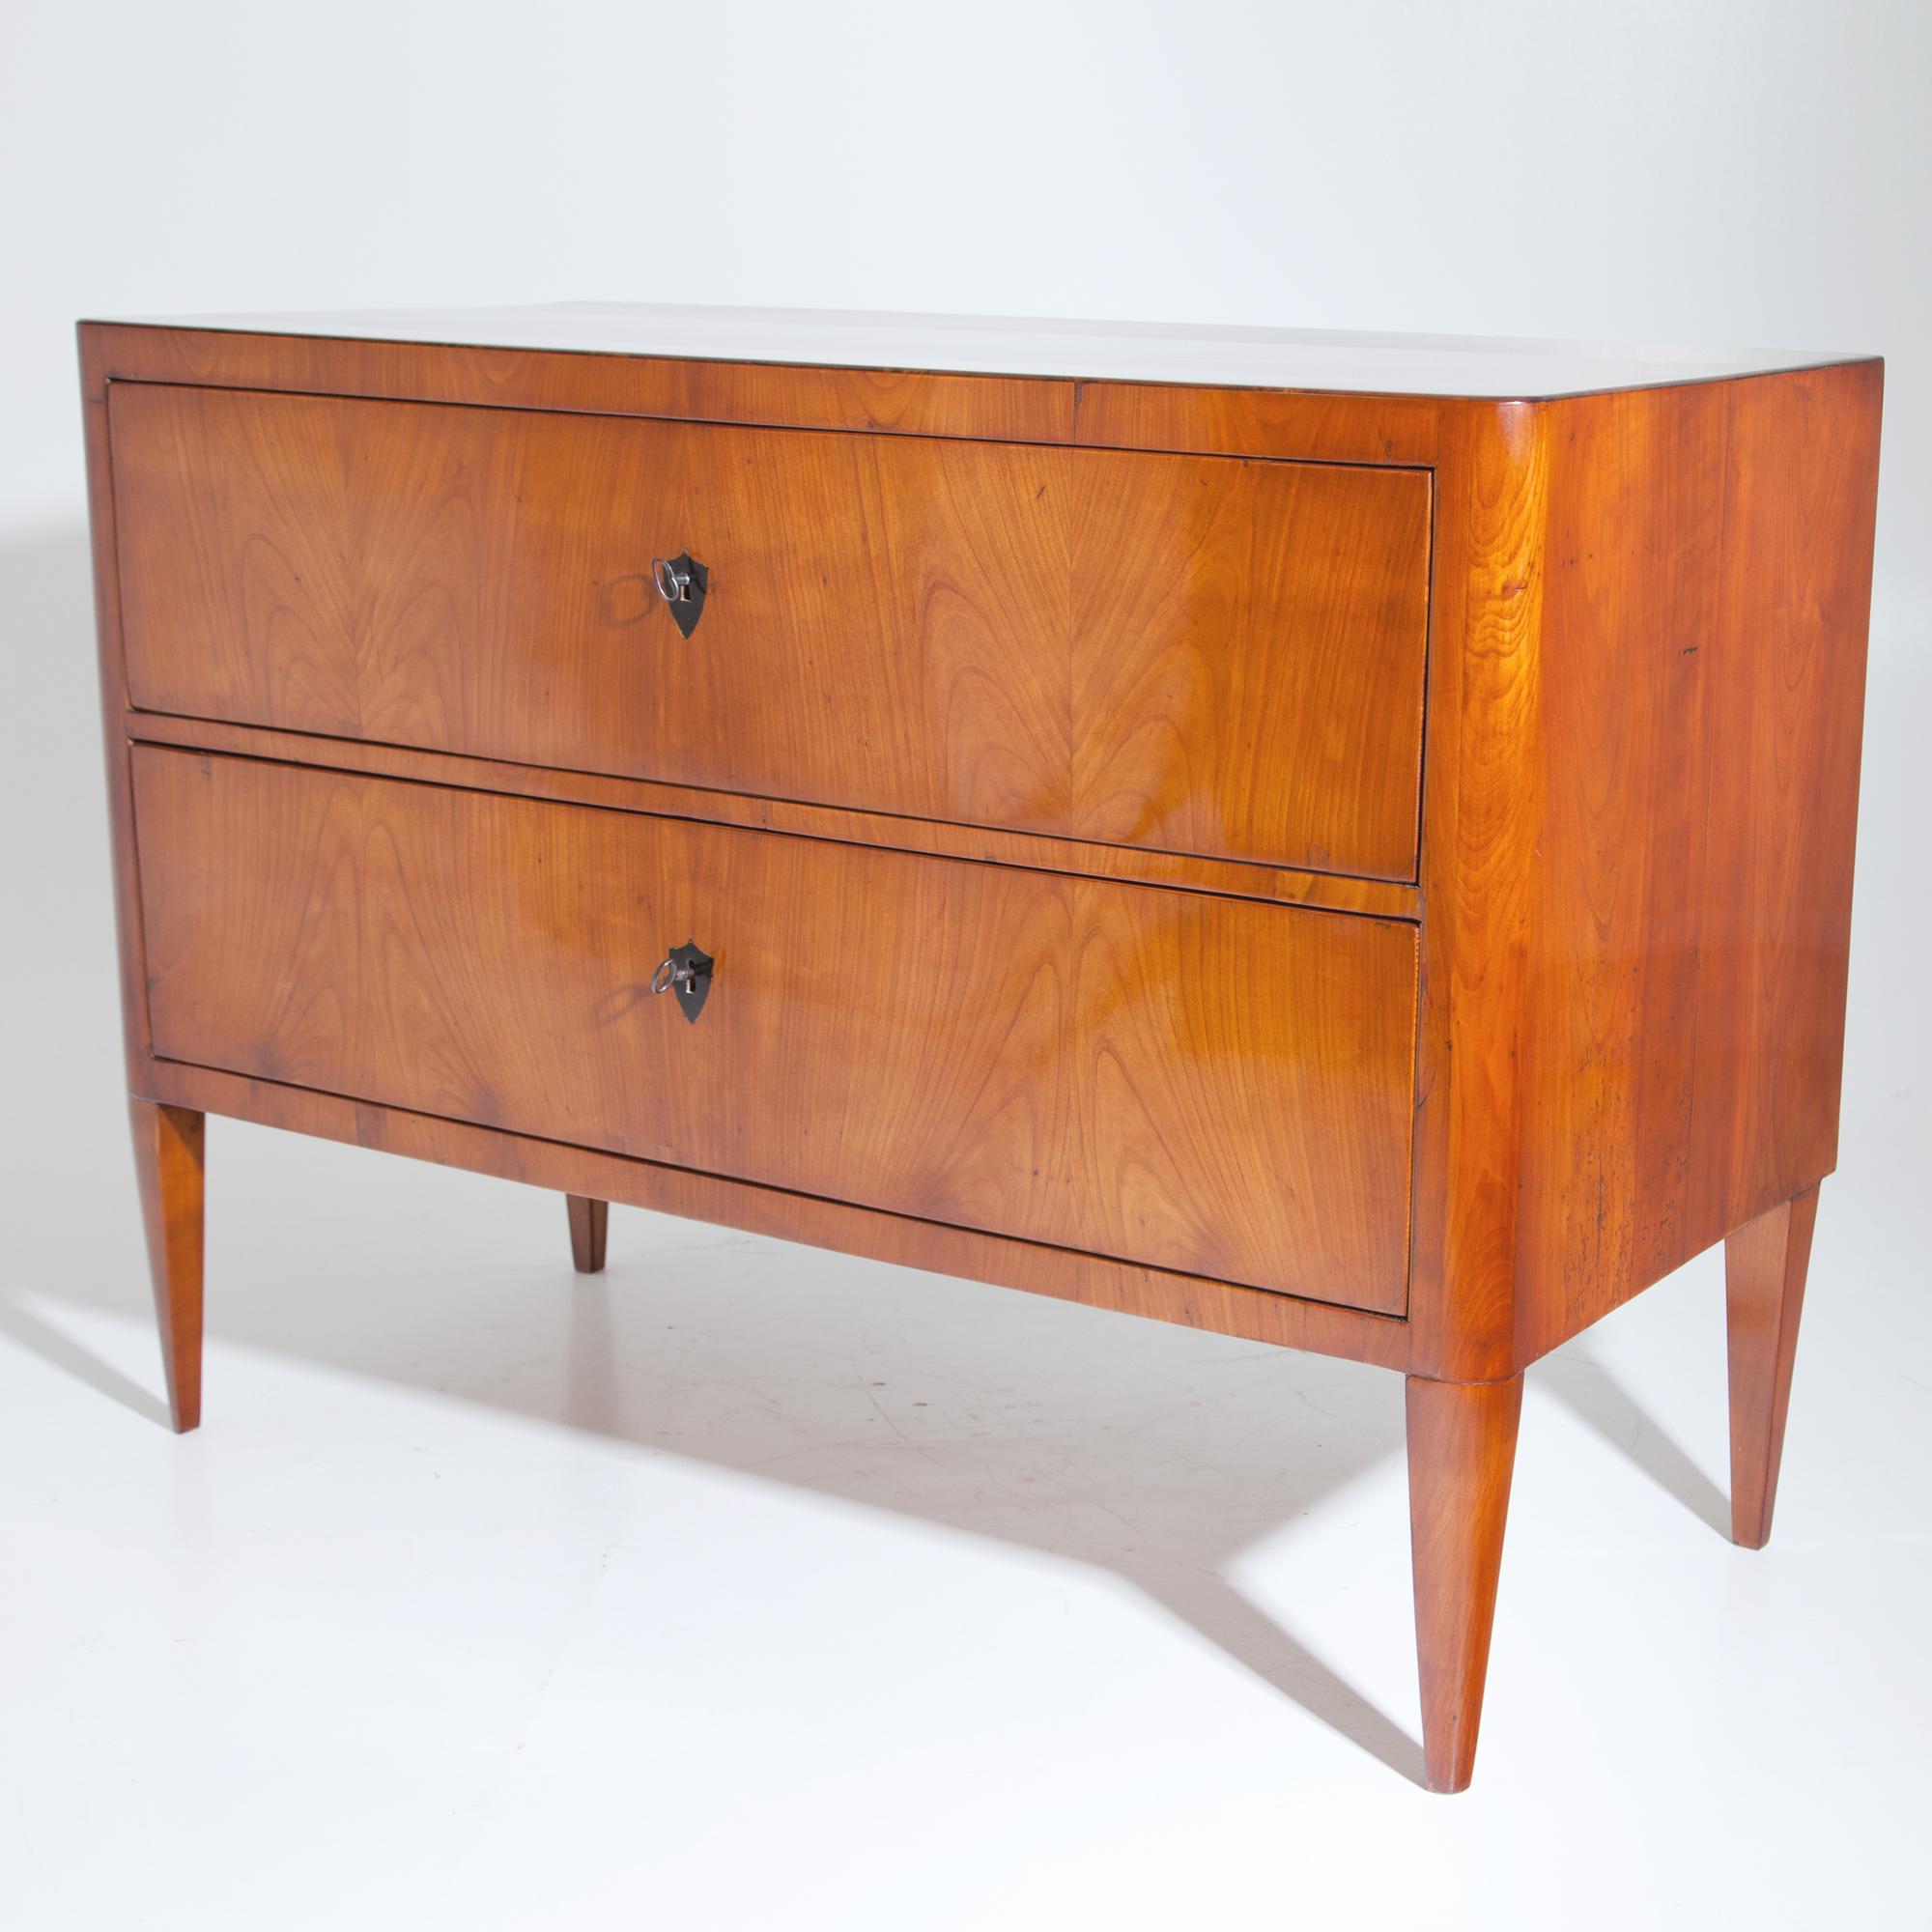 Biedermeier cherrywood chest of drawers with two drawers, standing on rounded pointed feet, the escutcheons are ebonized. Expertly restored condition.